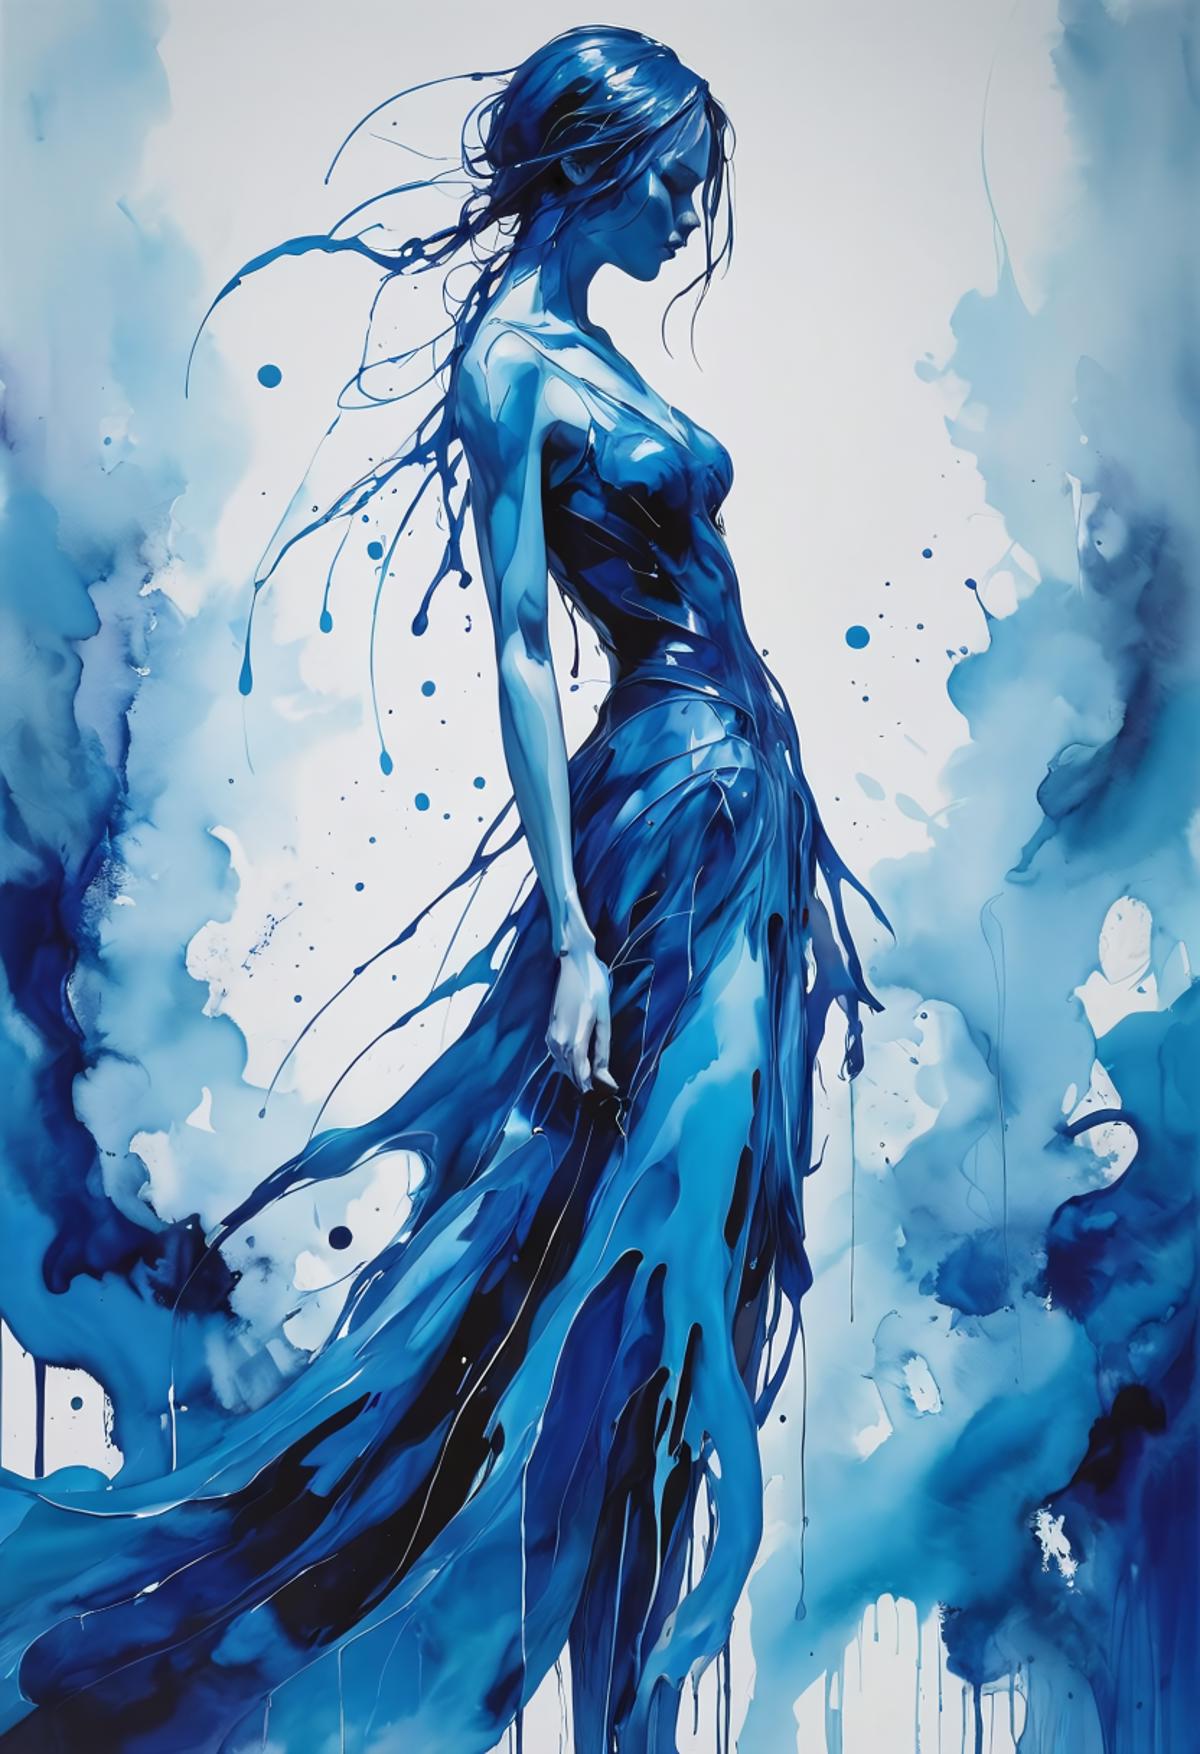 A blue and white painting of a woman wearing a black dress.